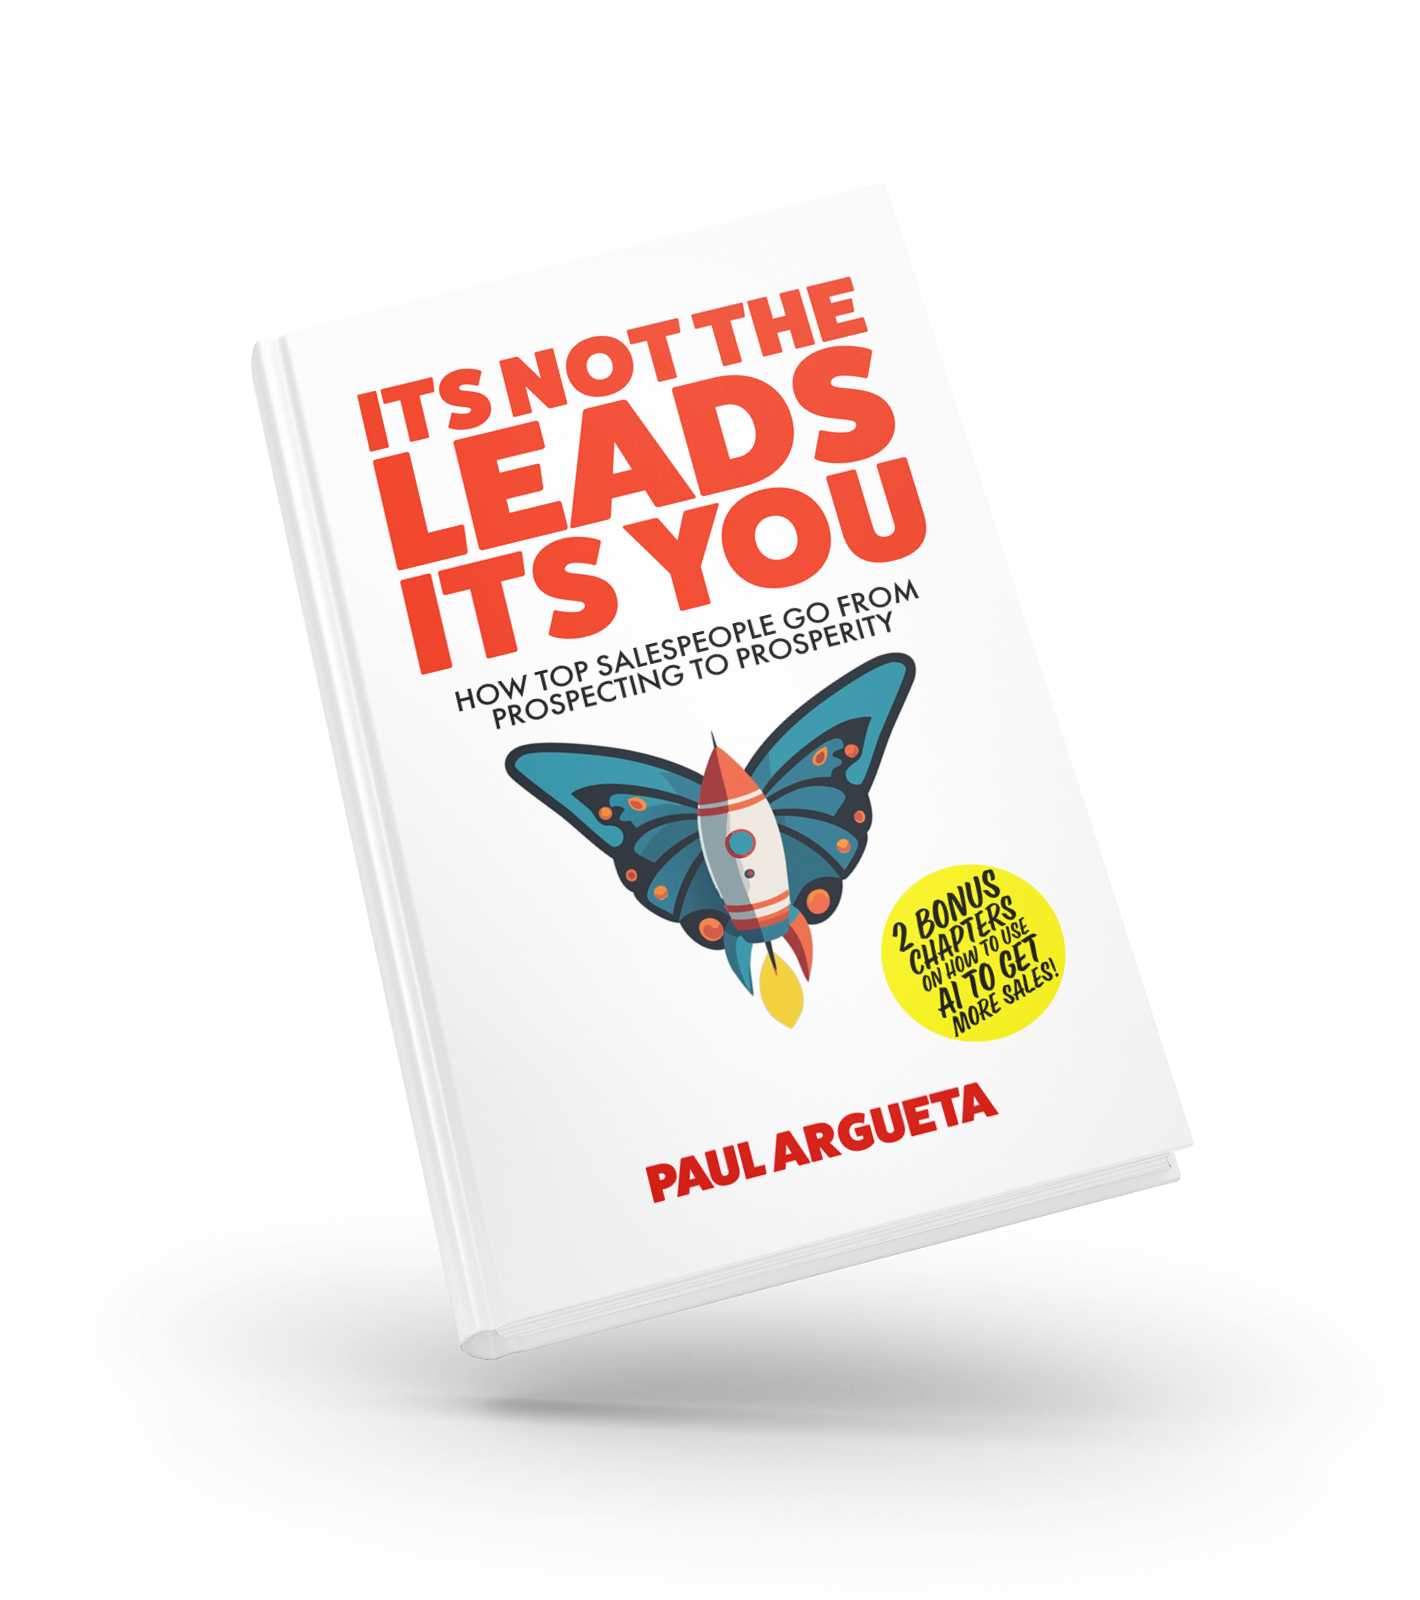 Its Not The Leads Its You Book Available on Amazon Paul Argueta Written For Top Salespeople